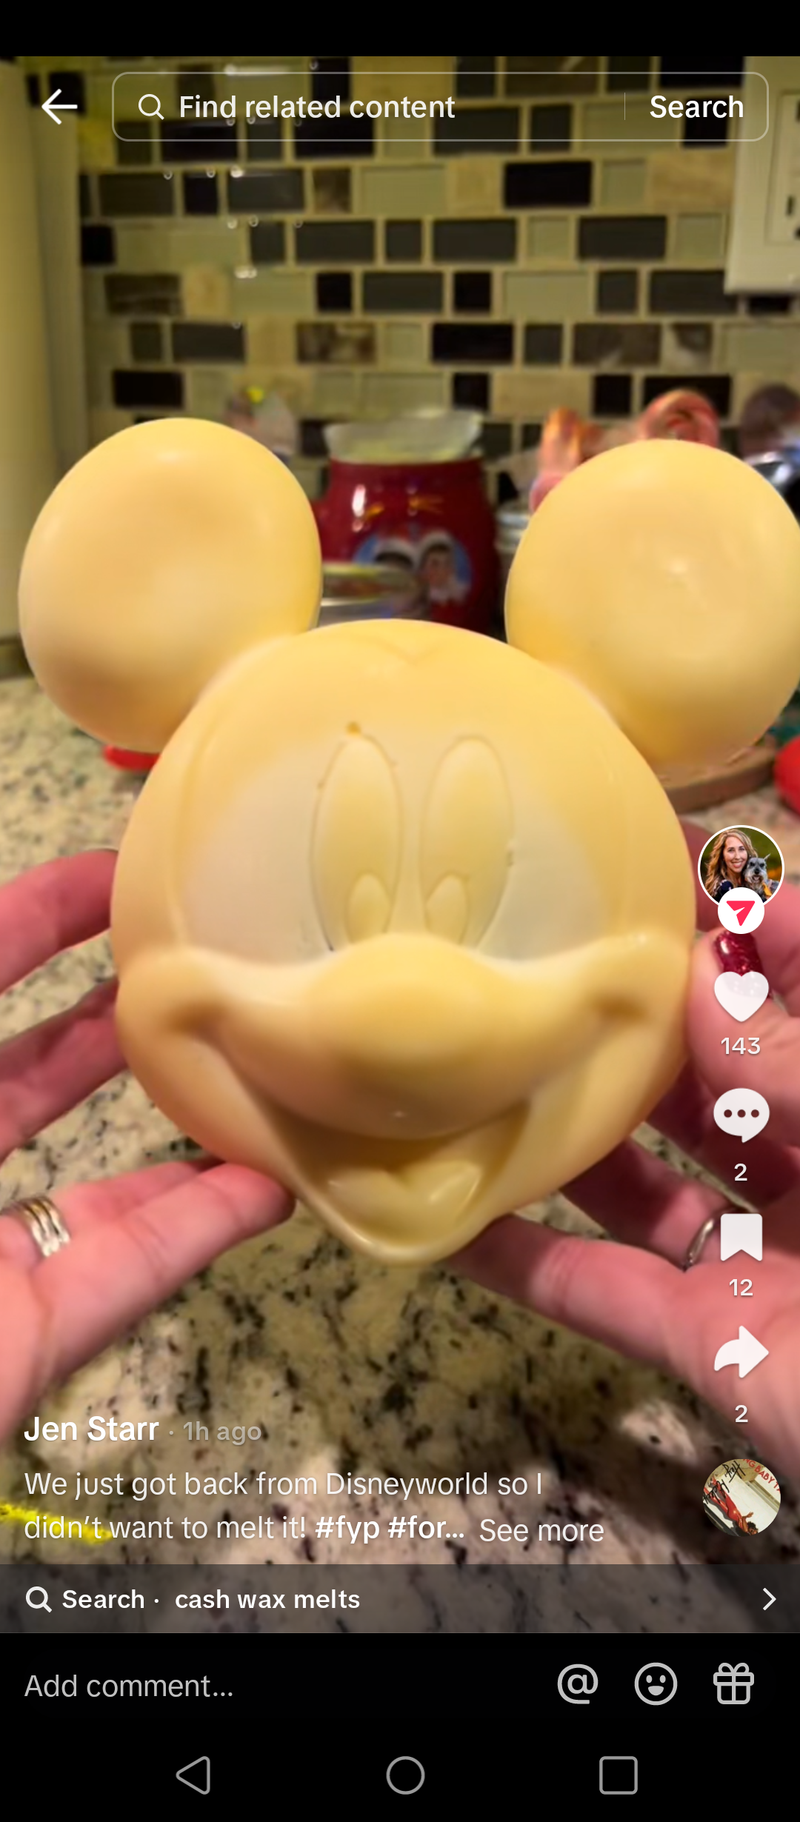 MICKEY MOUSE INSPIRED CASH WAX MELT (WORLDS LARGEST!)